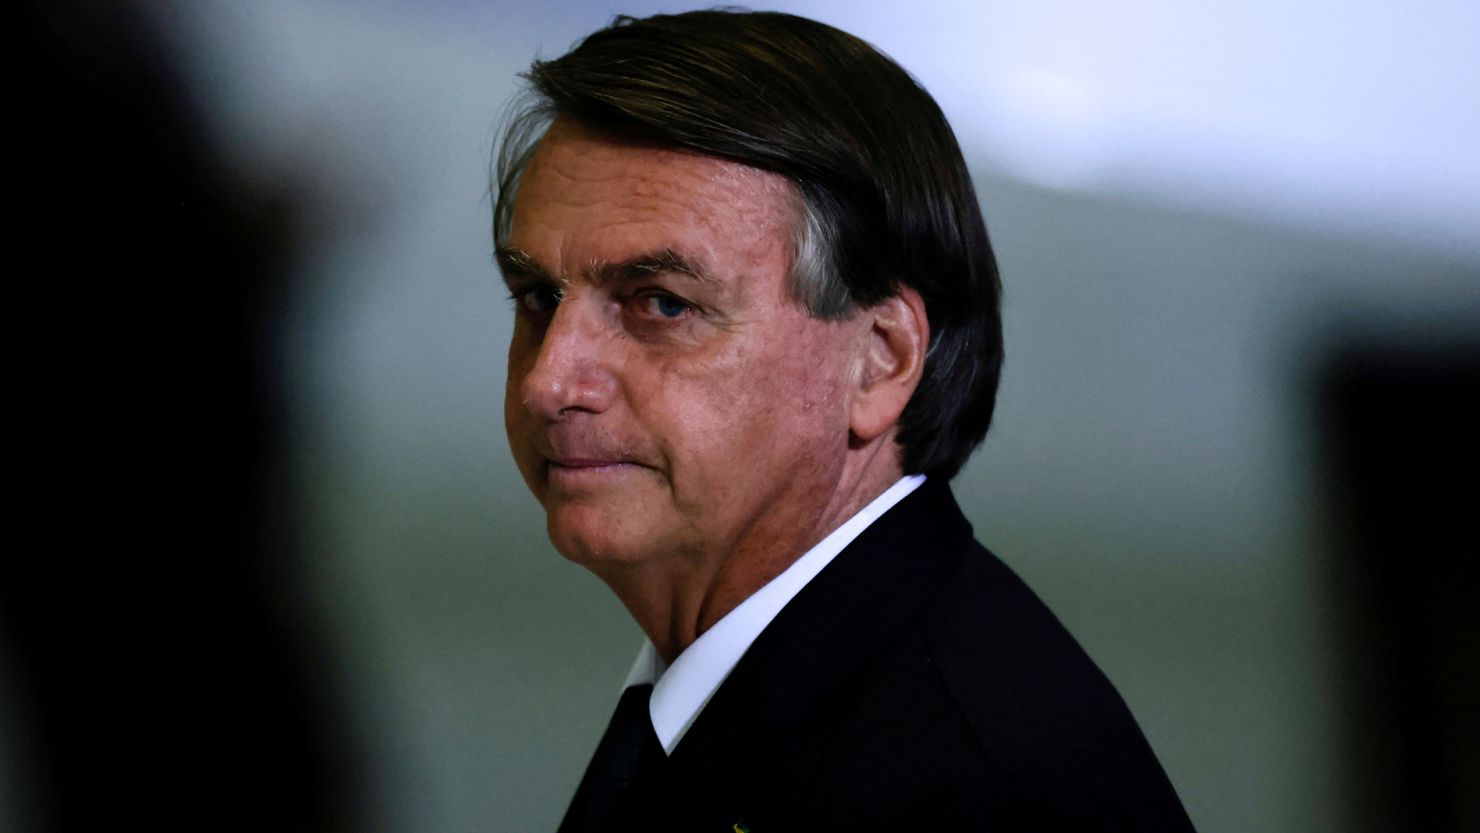 Bolsonaro looks on after a ceremony about the National Policy for Education at the Planalto Palace in Brasilia, Brazil June 20, 2022. 